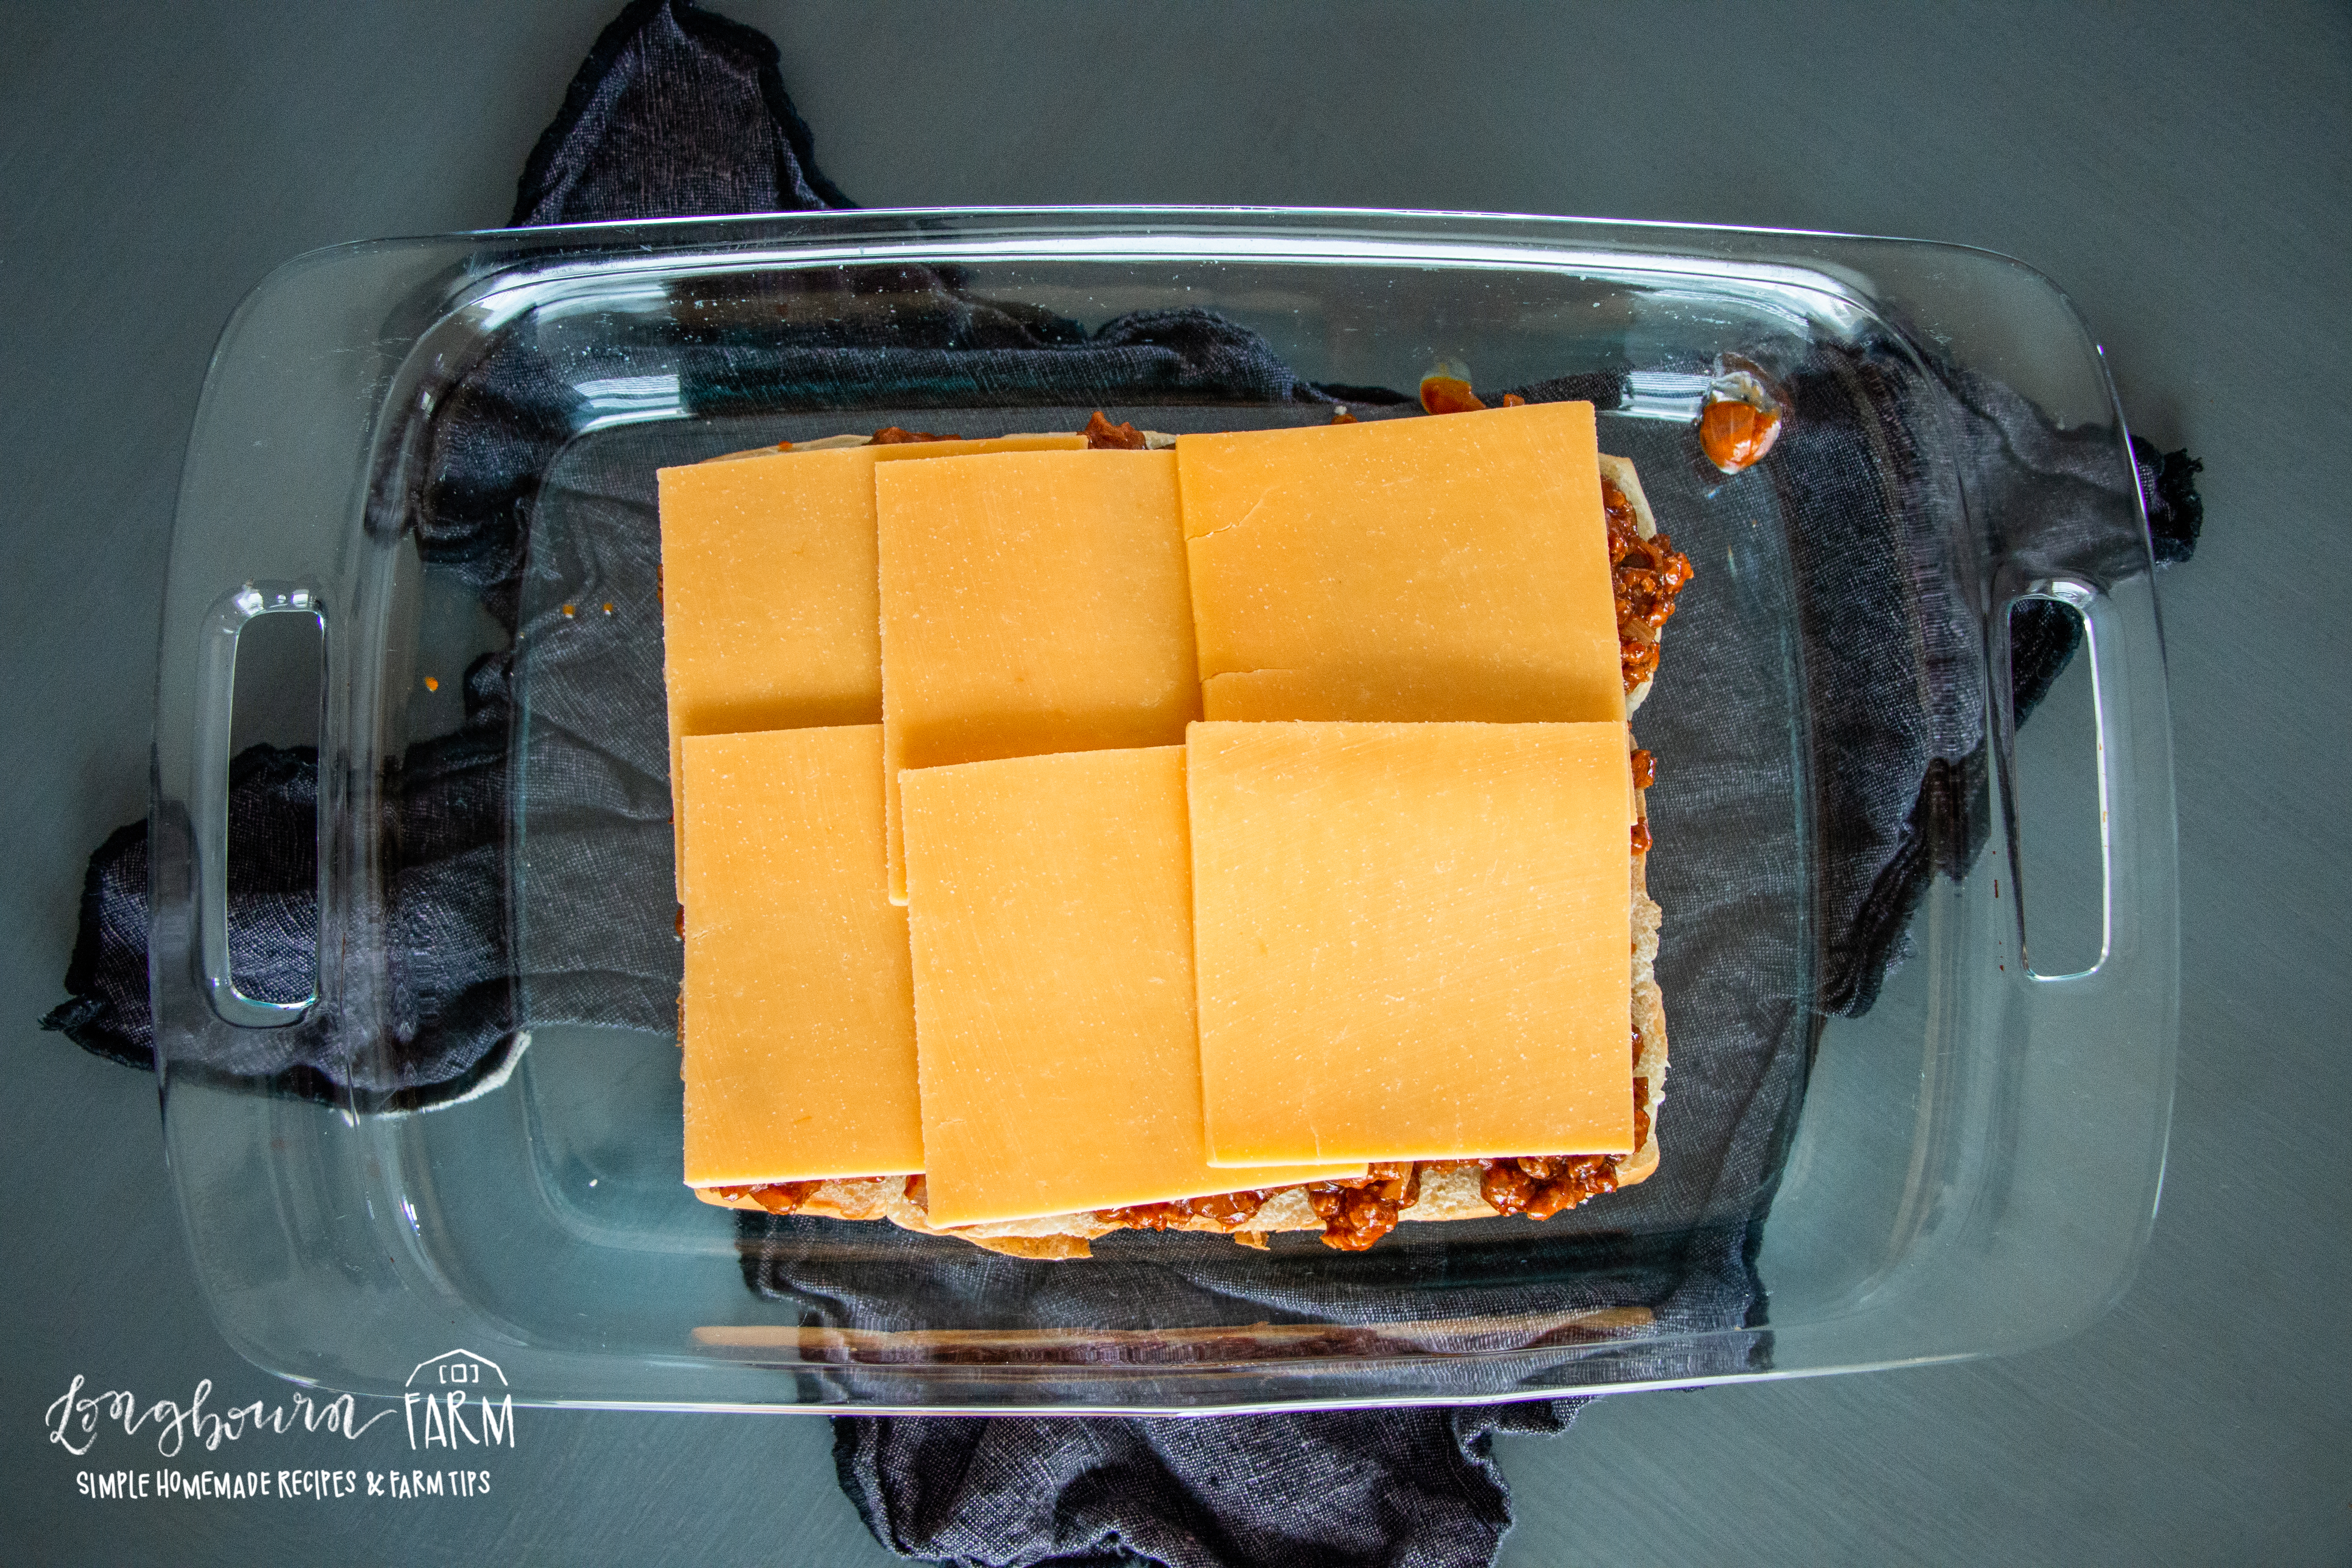 cheese slices on top of bbq beef mixture on sandwich bottoms in a glass baking dish